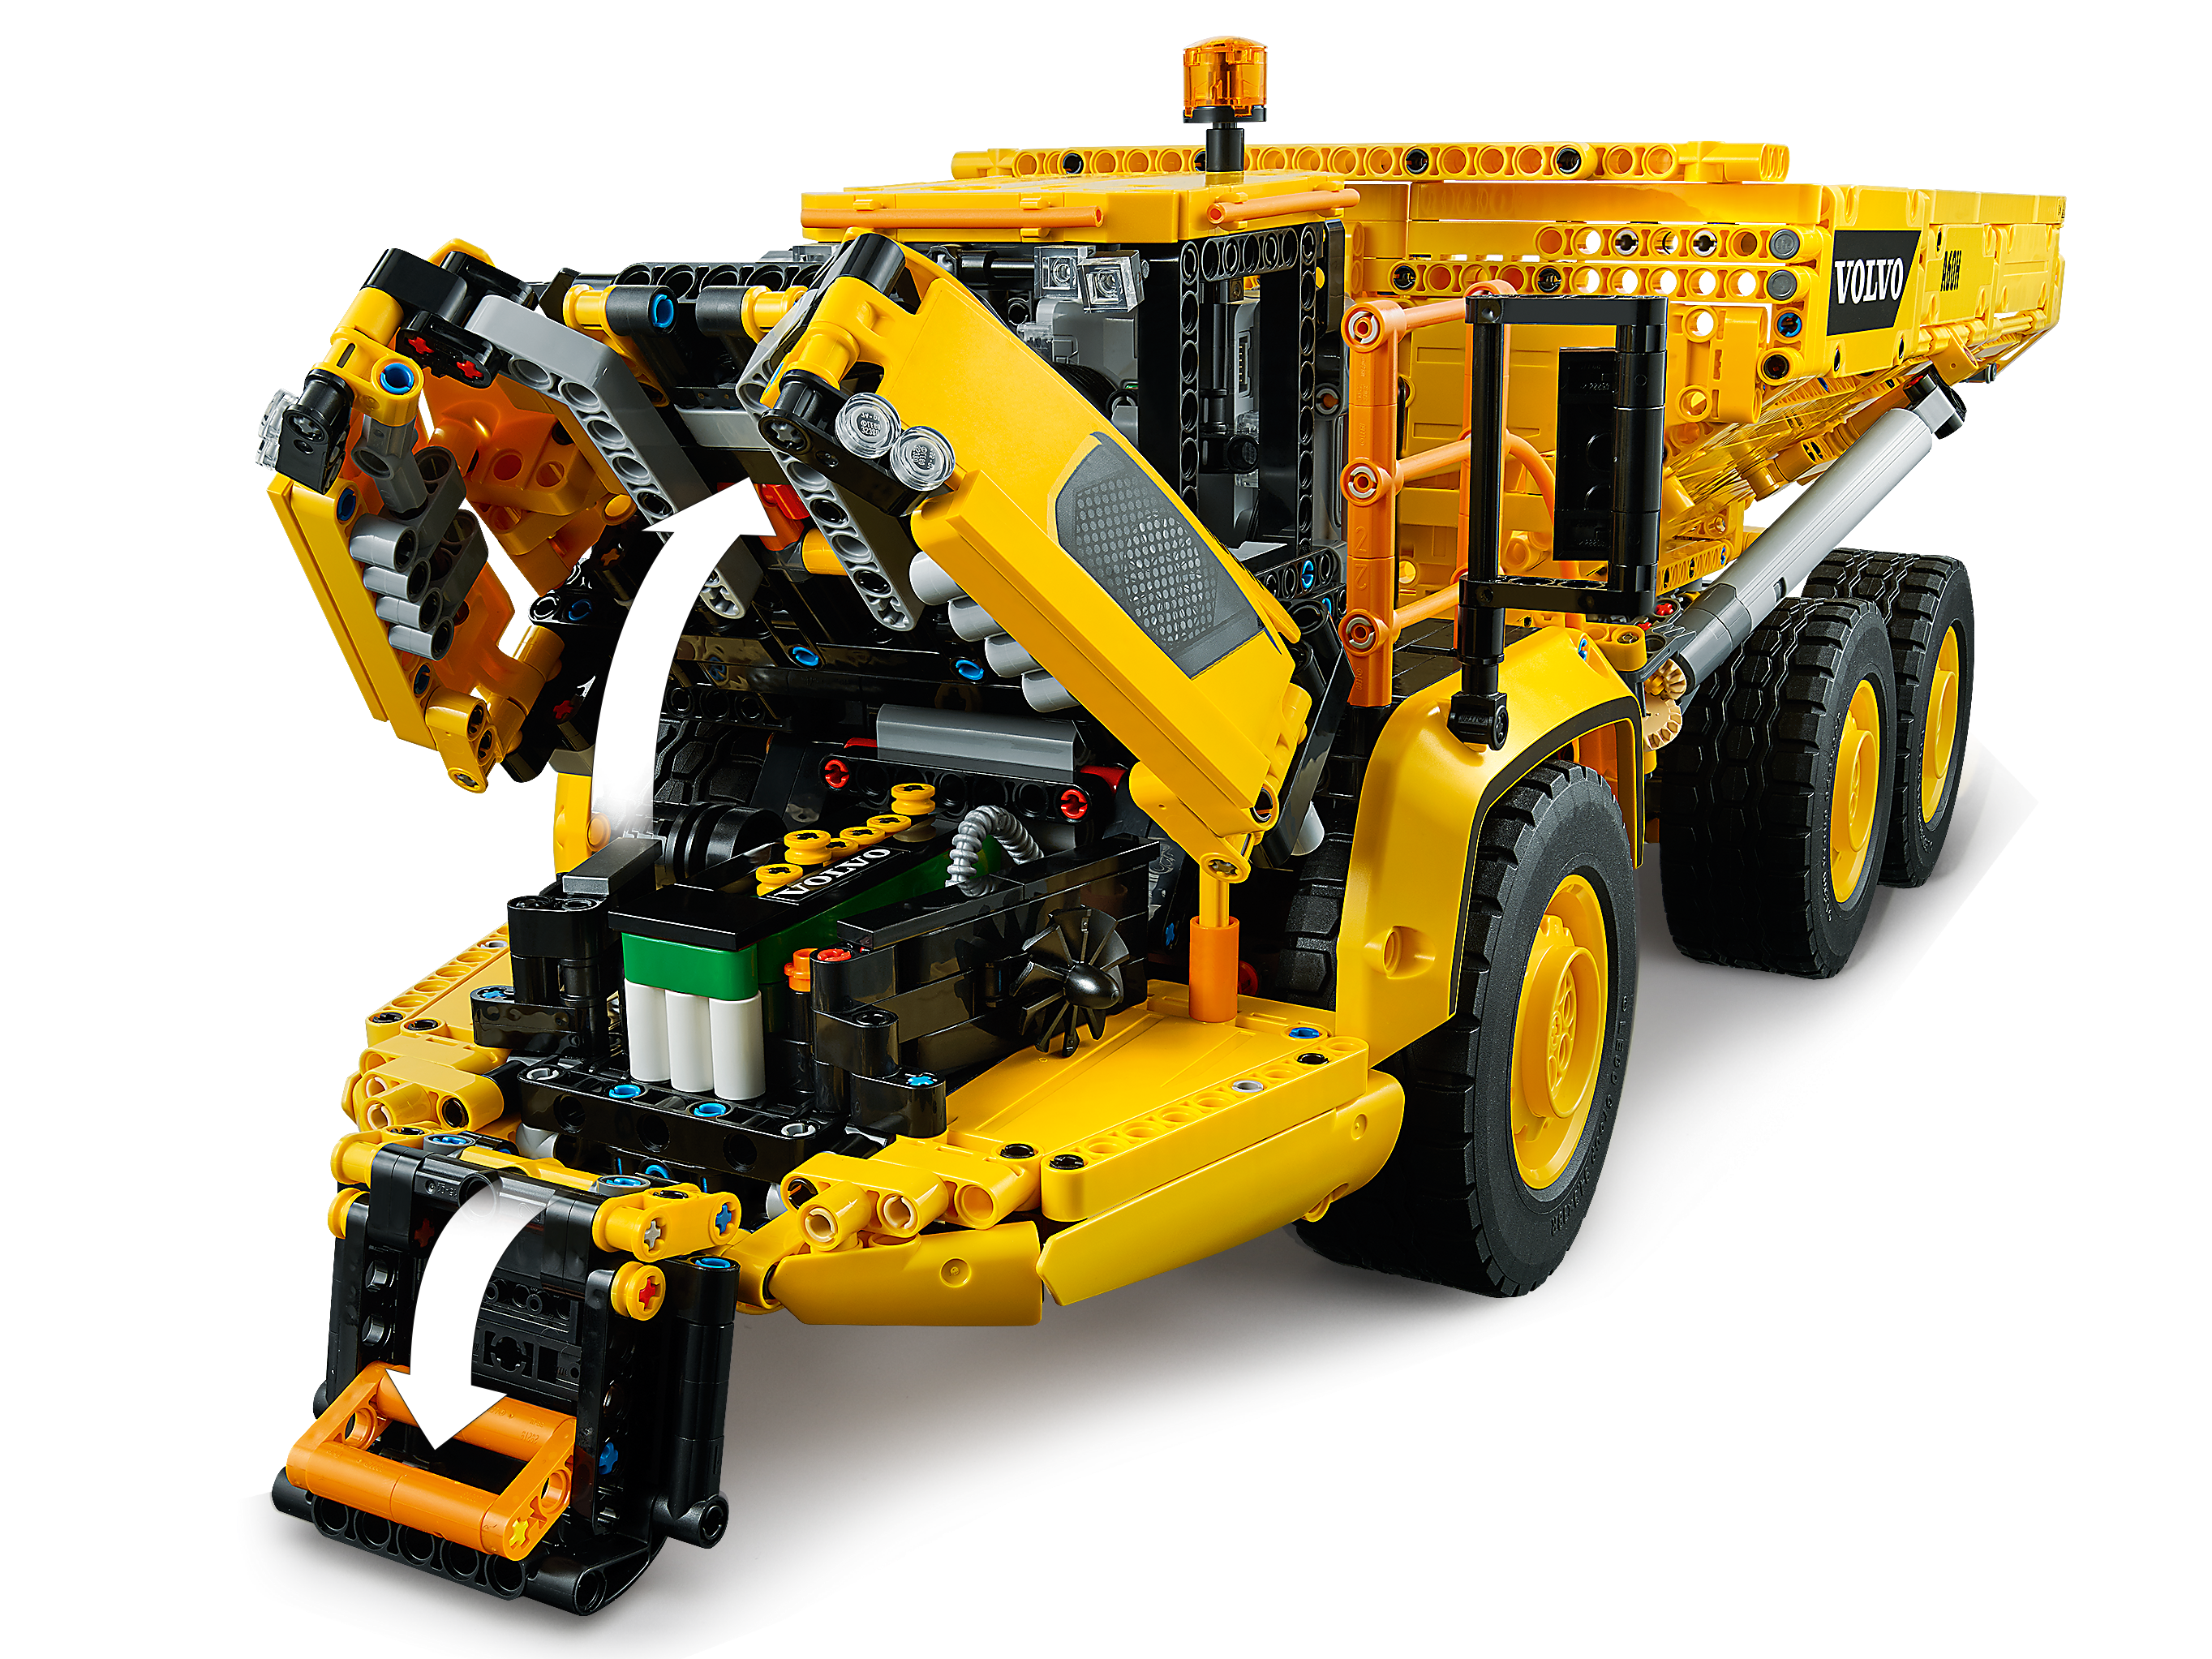 LEGO 42114 Technic 6x6 Volvo Articulated Hauler Truck Toy RC Car Construction Vehicle